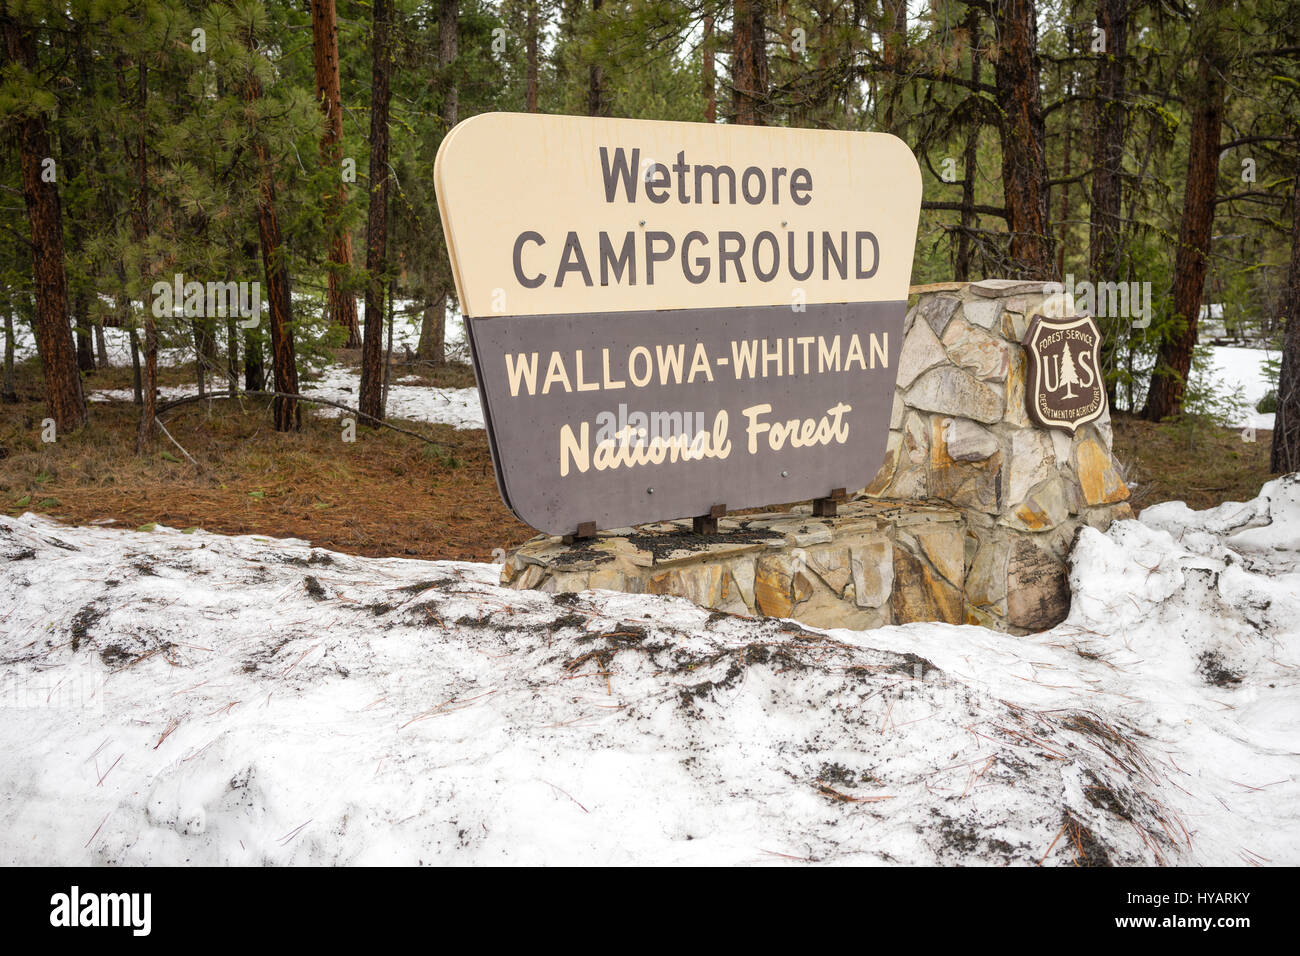 Fresh snow stands around the Wetmore Campground sign in Wallowa-Whitman National Forest Stock Photo